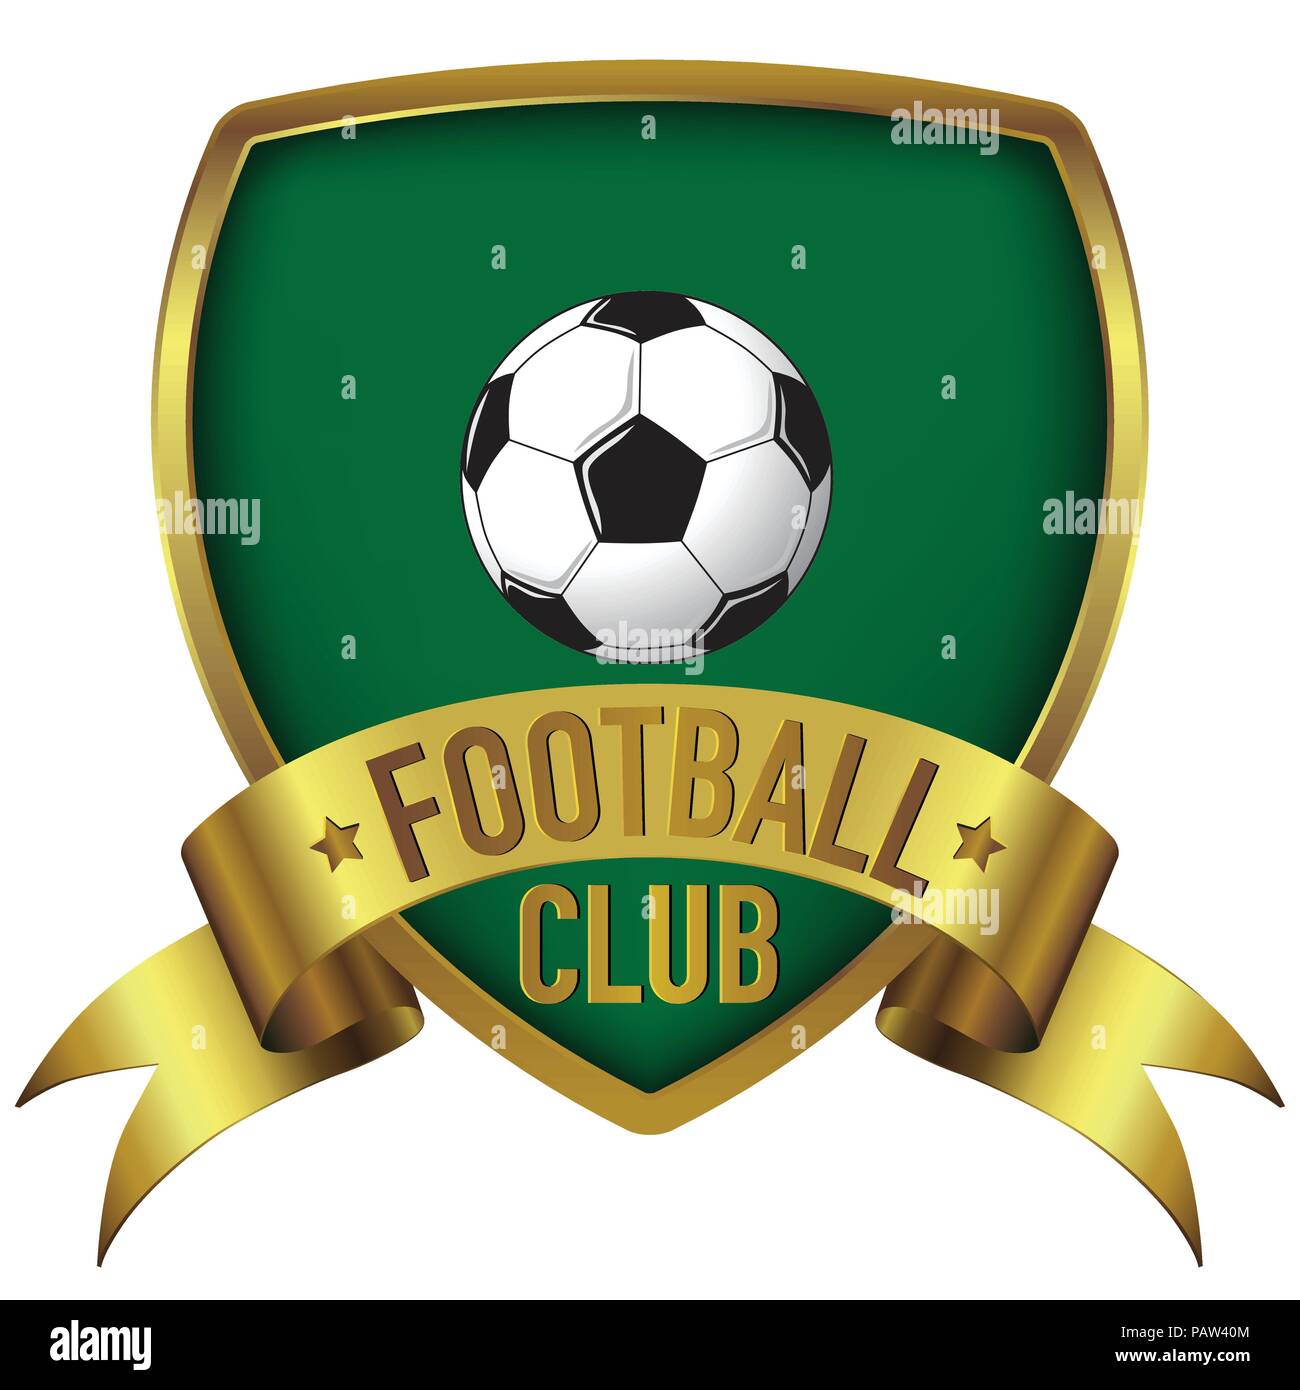 Football Club logo design in green background with gold frame and ribbon Stock Vector